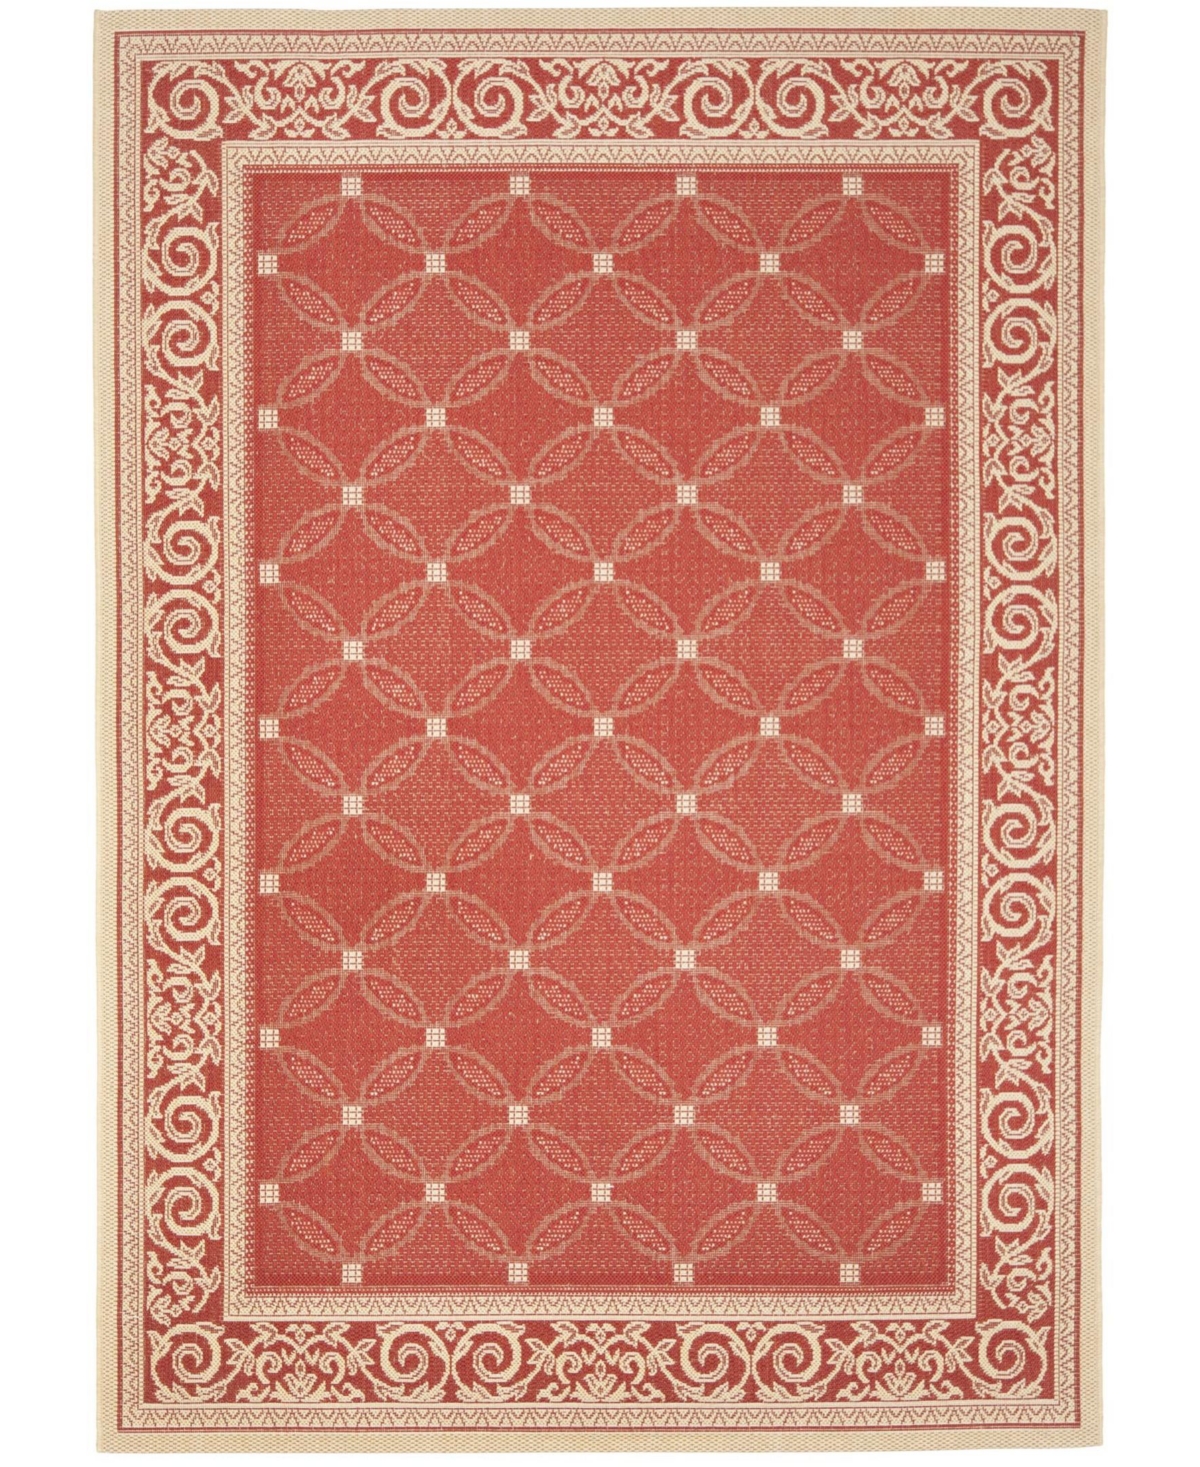 Safavieh Courtyard Cy1502 Red And Natural 8' X 11' Outdoor Area Rug